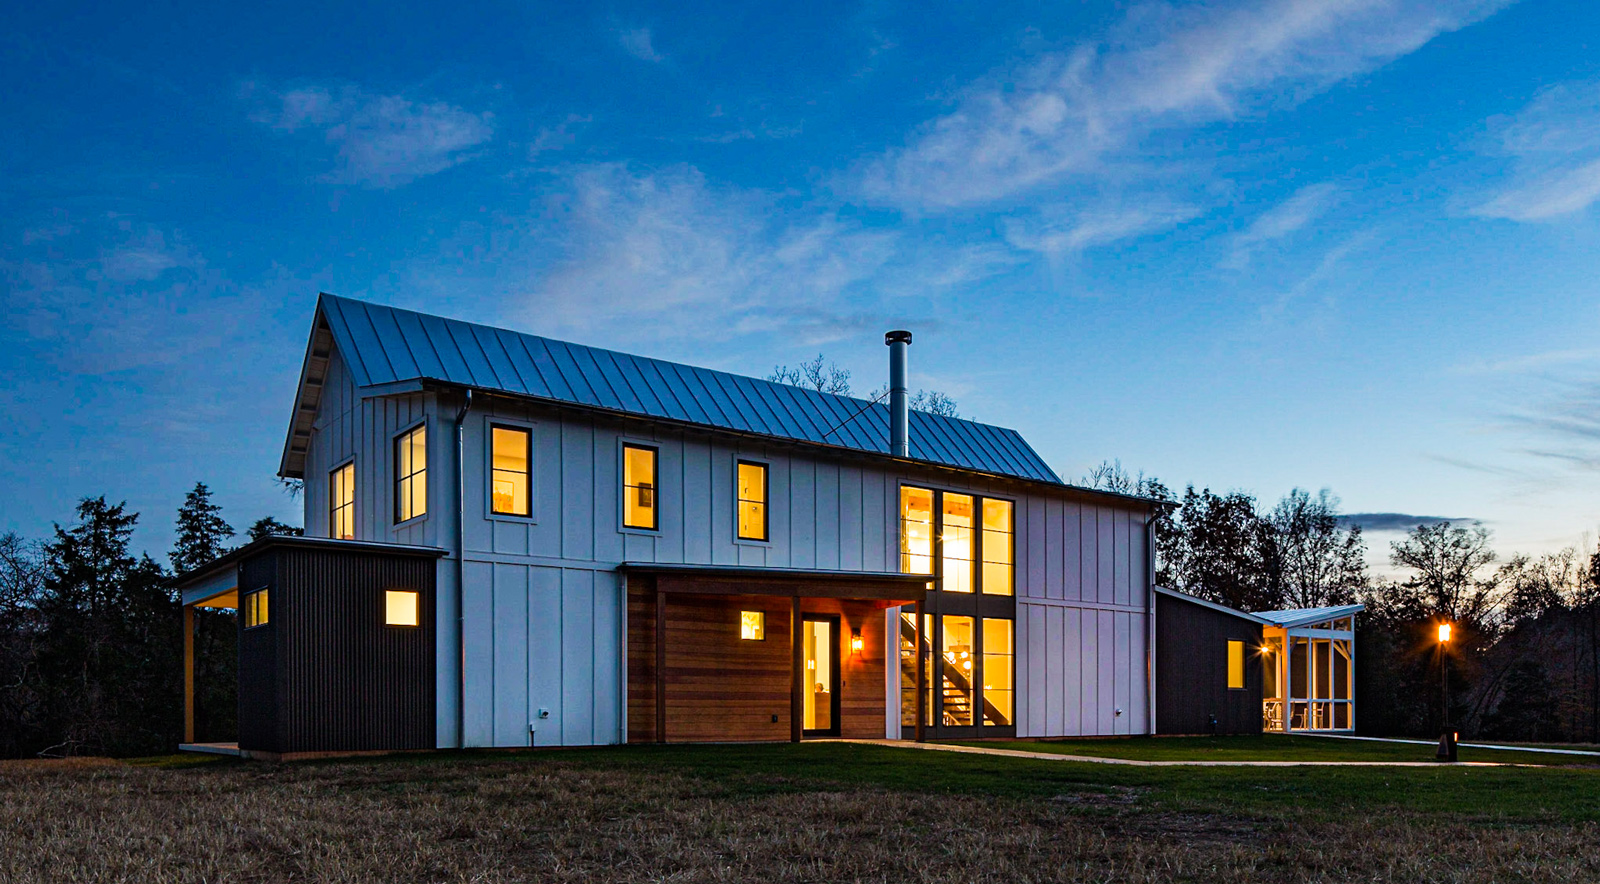 A modern farmhouse photographed from the exterior at dusk